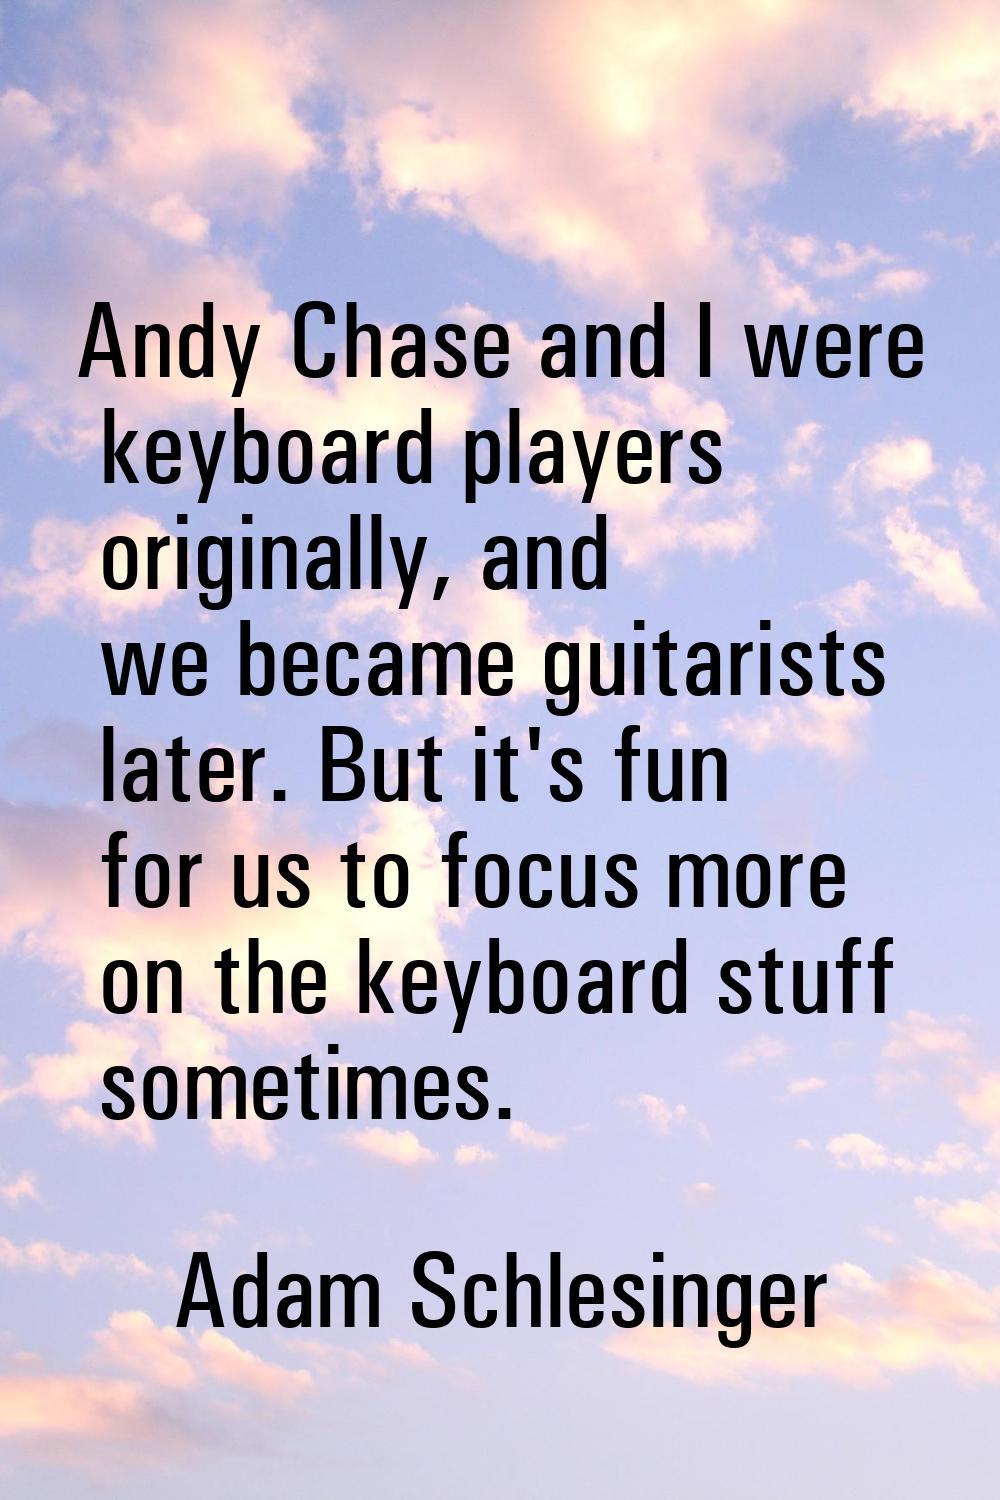 Andy Chase and I were keyboard players originally, and we became guitarists later. But it's fun for